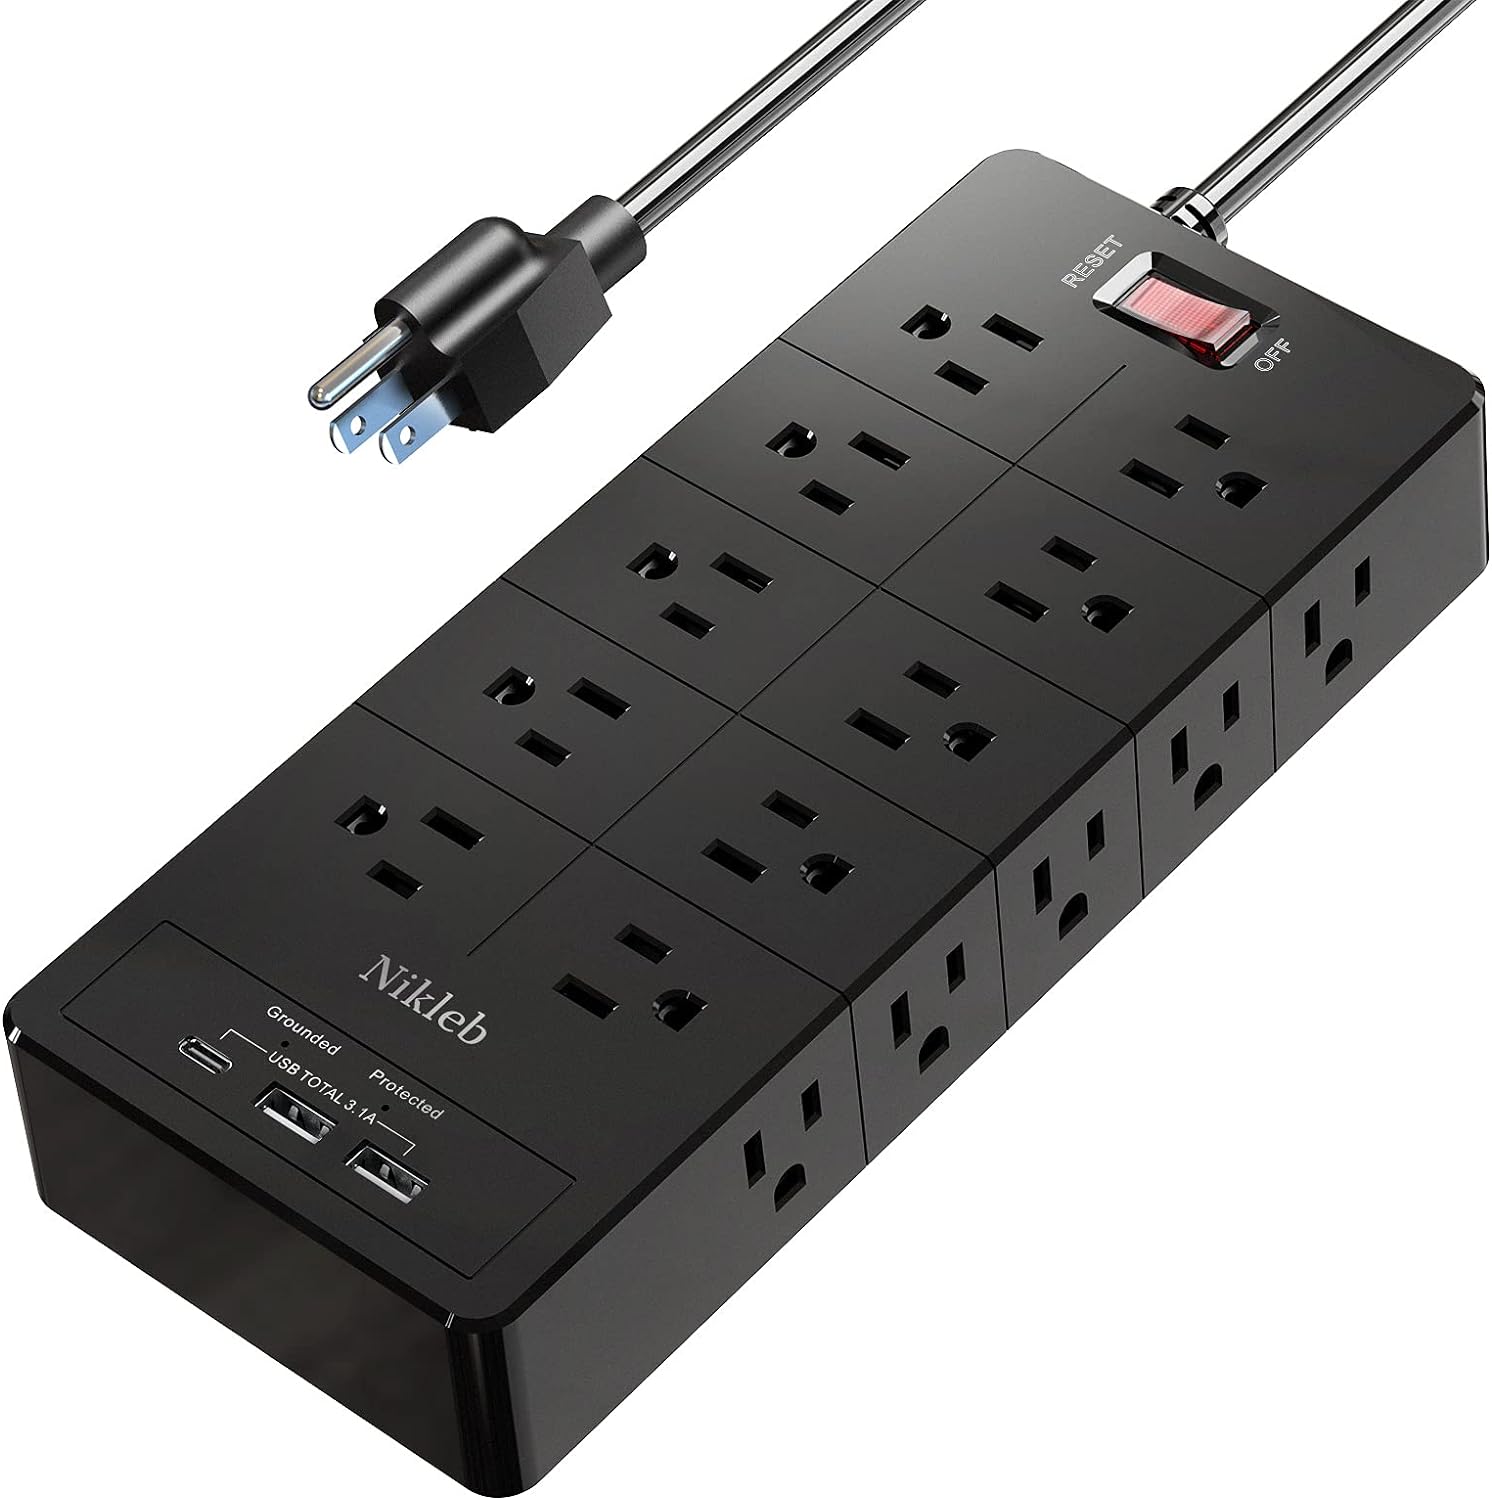 I recently purchased this power strip, and although it' too early to determine its long-term durability and quality, I must admit that it has quickly become the best power strip I have ever used.Prior to acquiring this power strip, I had been relying on several small power strips to accommodate my various devices. However, this power strip stands out due to its exceptional design and versatility. One of its notable features is the ability to accommodate large adapters on the side outlets, while